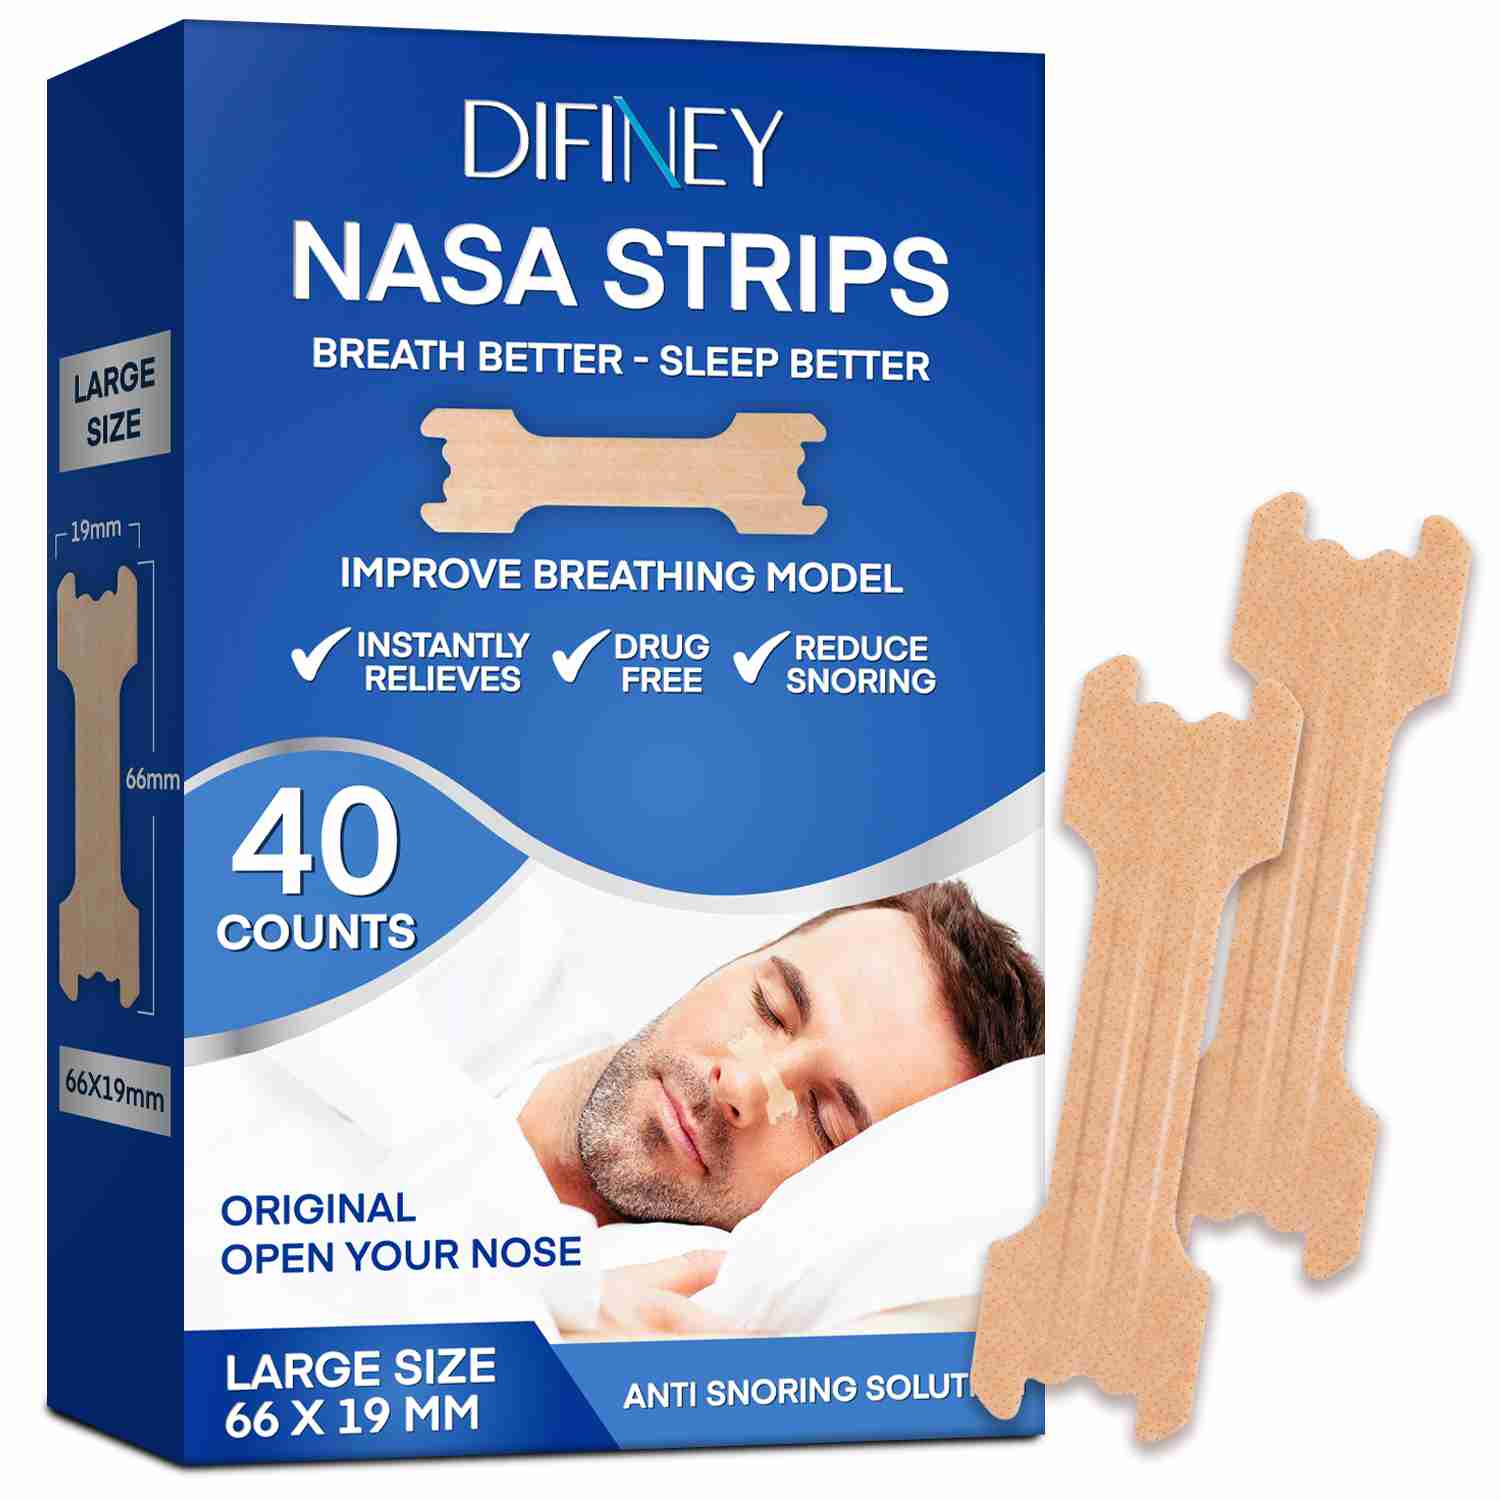 difiney-nasal-strips-for-snoring with cash back rebate